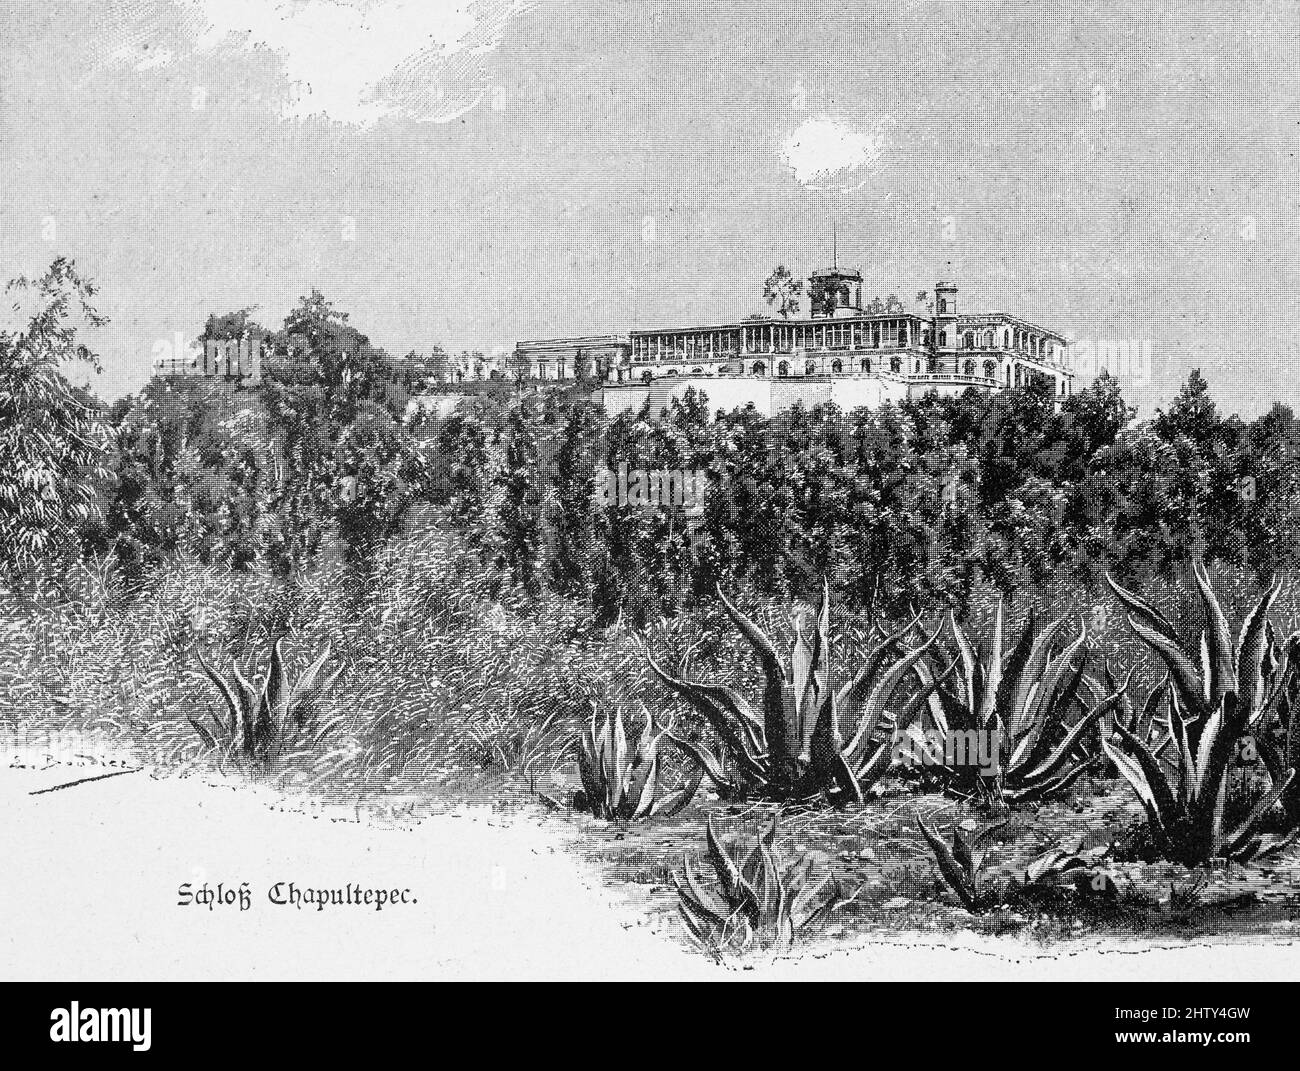 Chapultepec Castle, columns, tower, park, algave, trees, historical illustration from 1897, Mexico City, Mexico, Central America Stock Photo